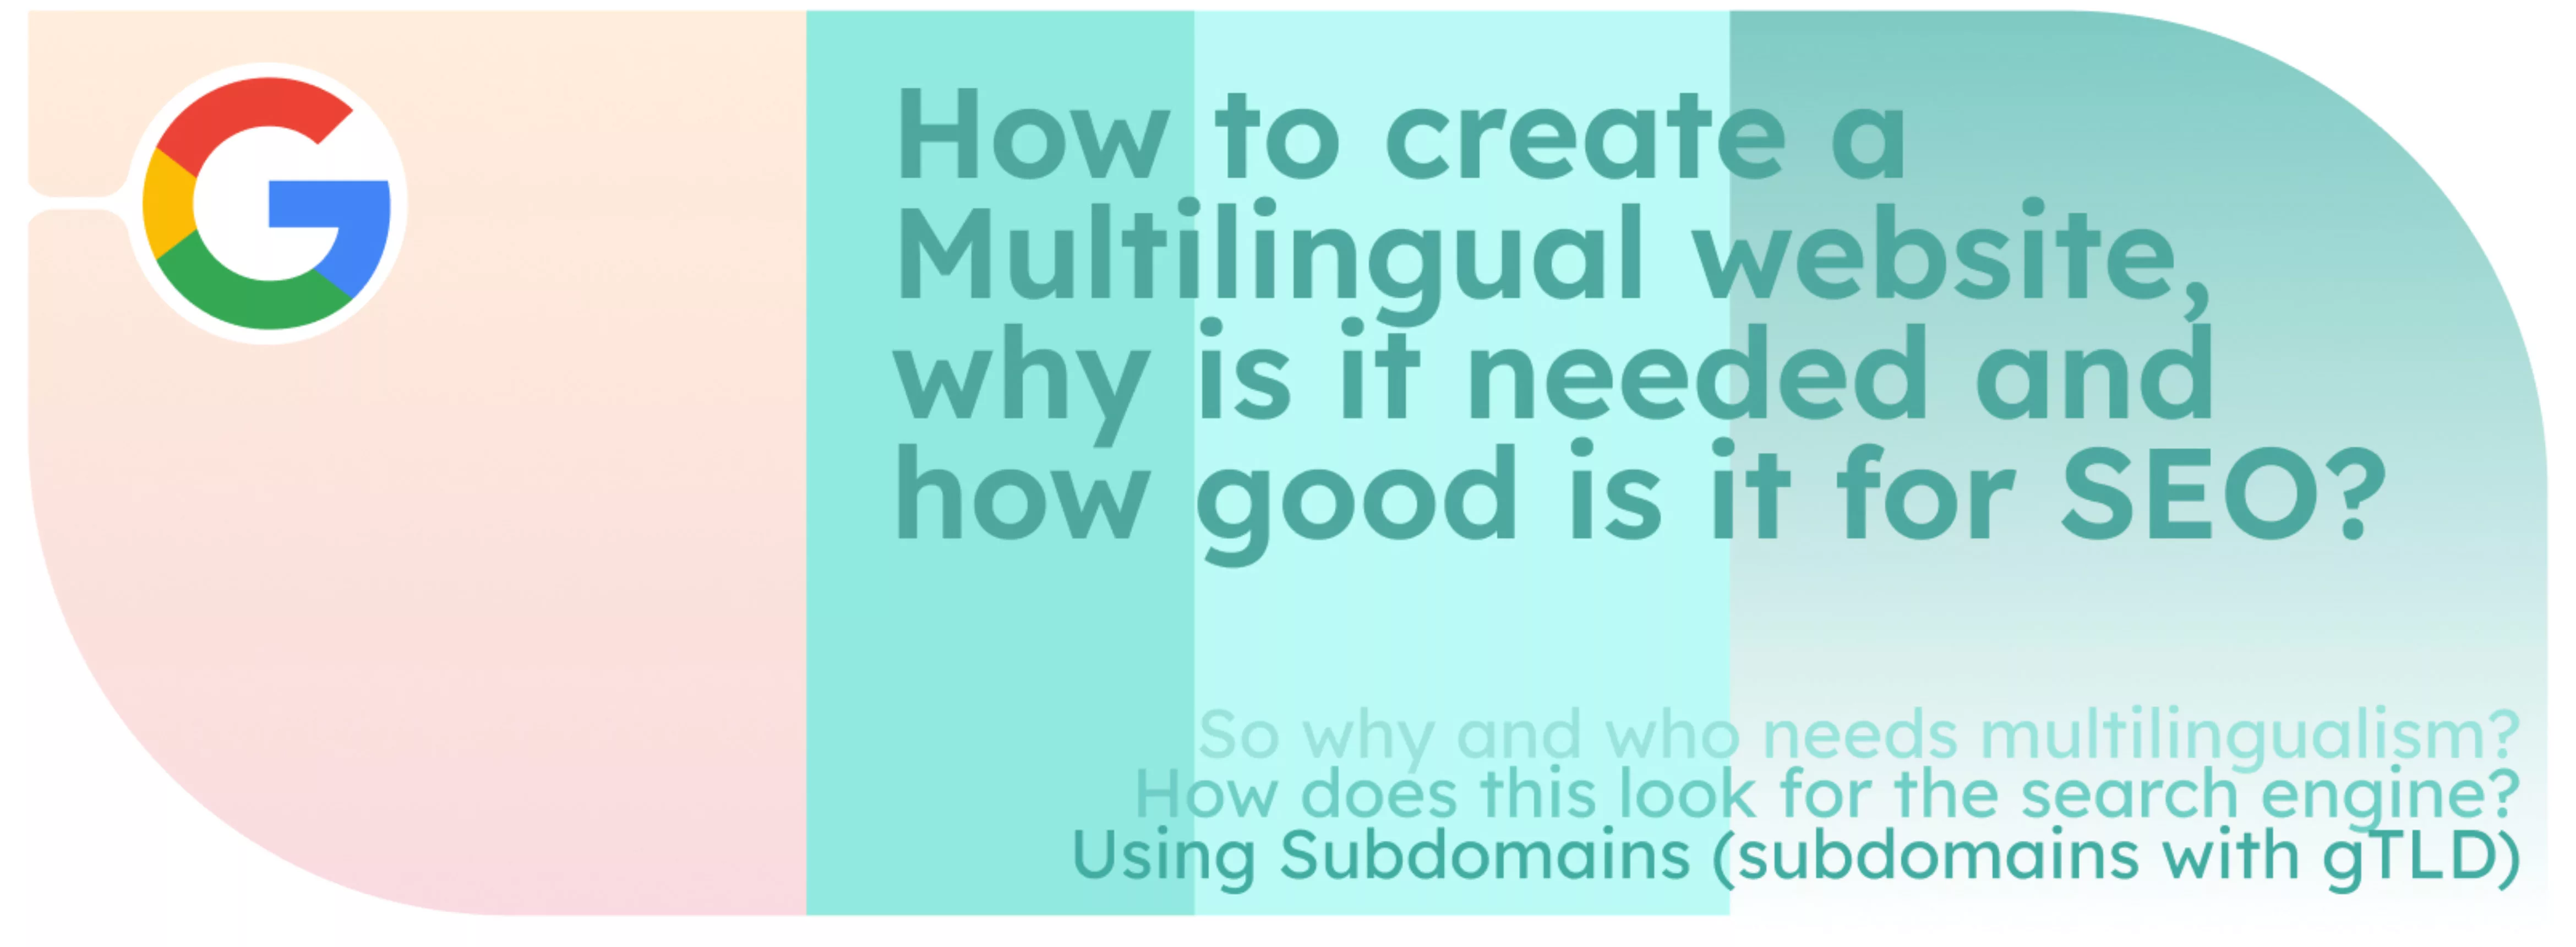 How to create a Multilingual website, why is it needed and how good is it for SEO?